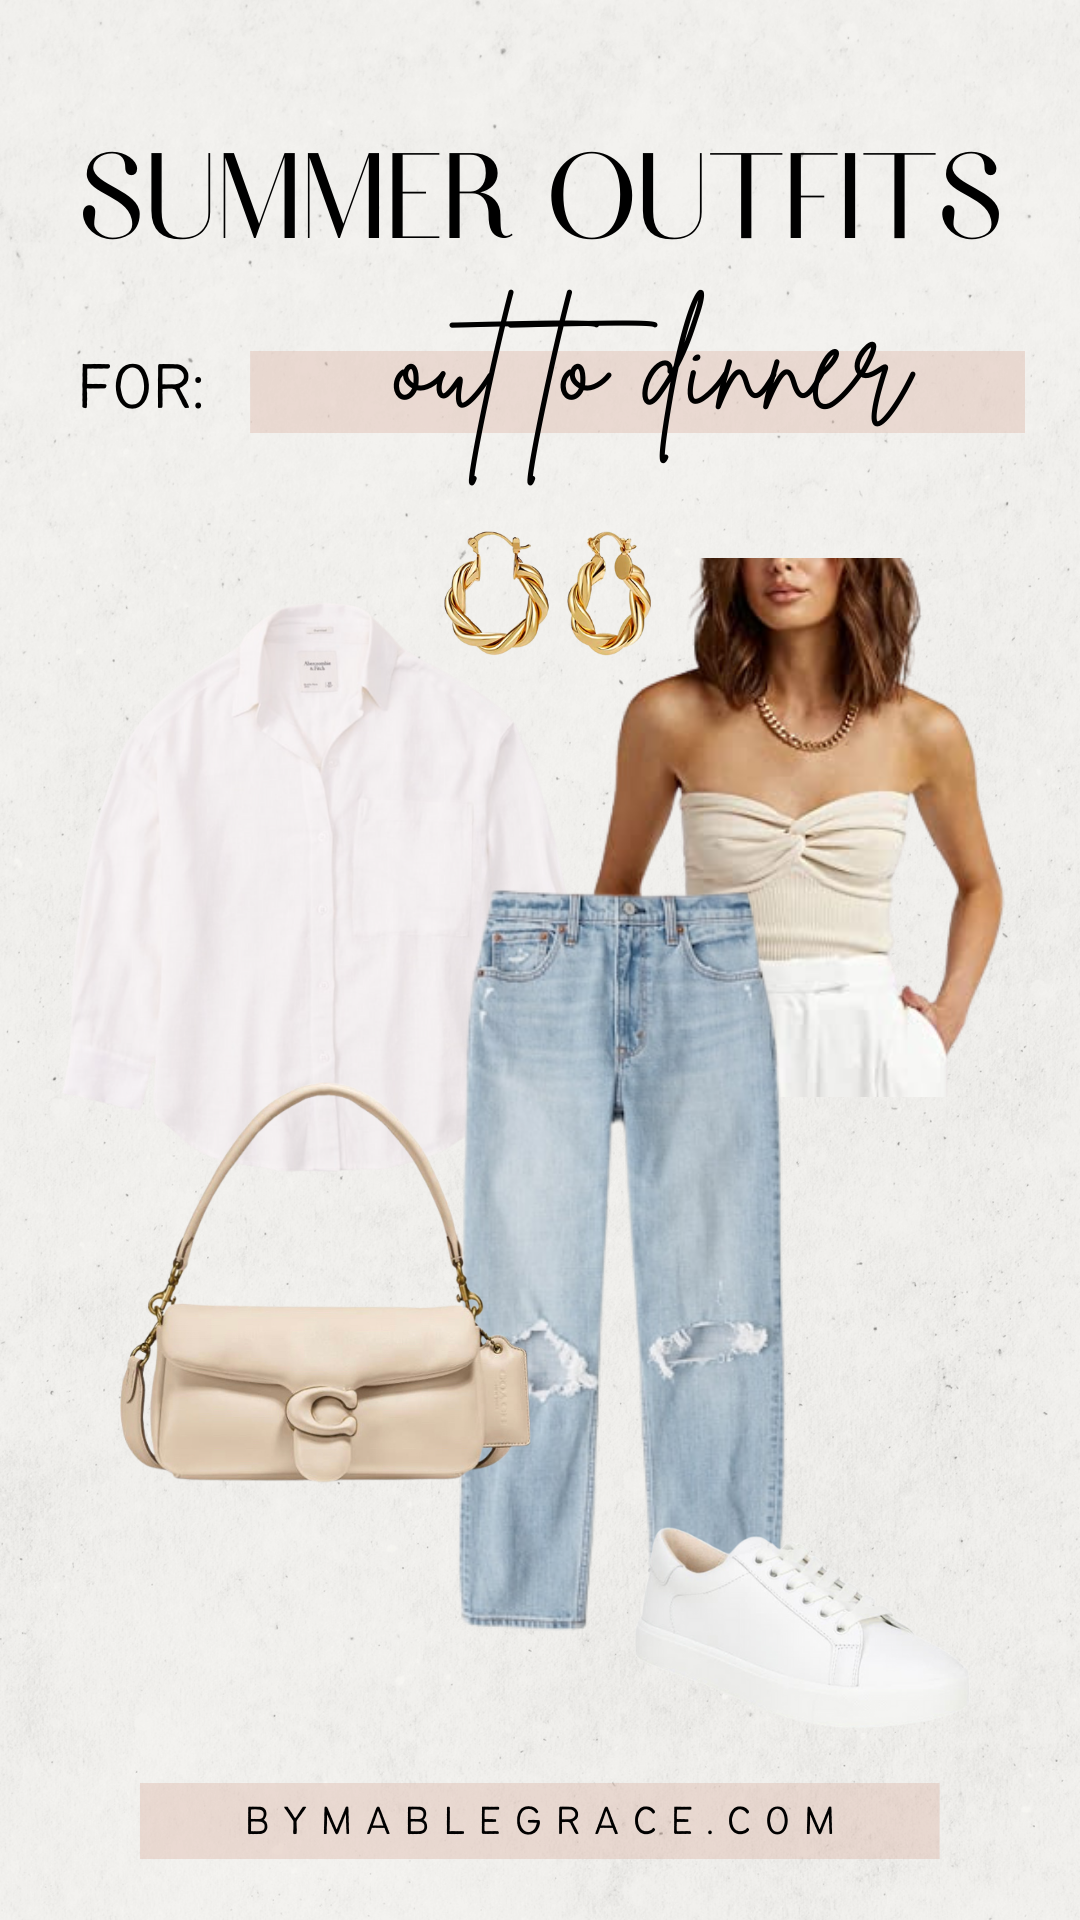 6 Summer Outfit Ideas for Every Occassion - by mable grace